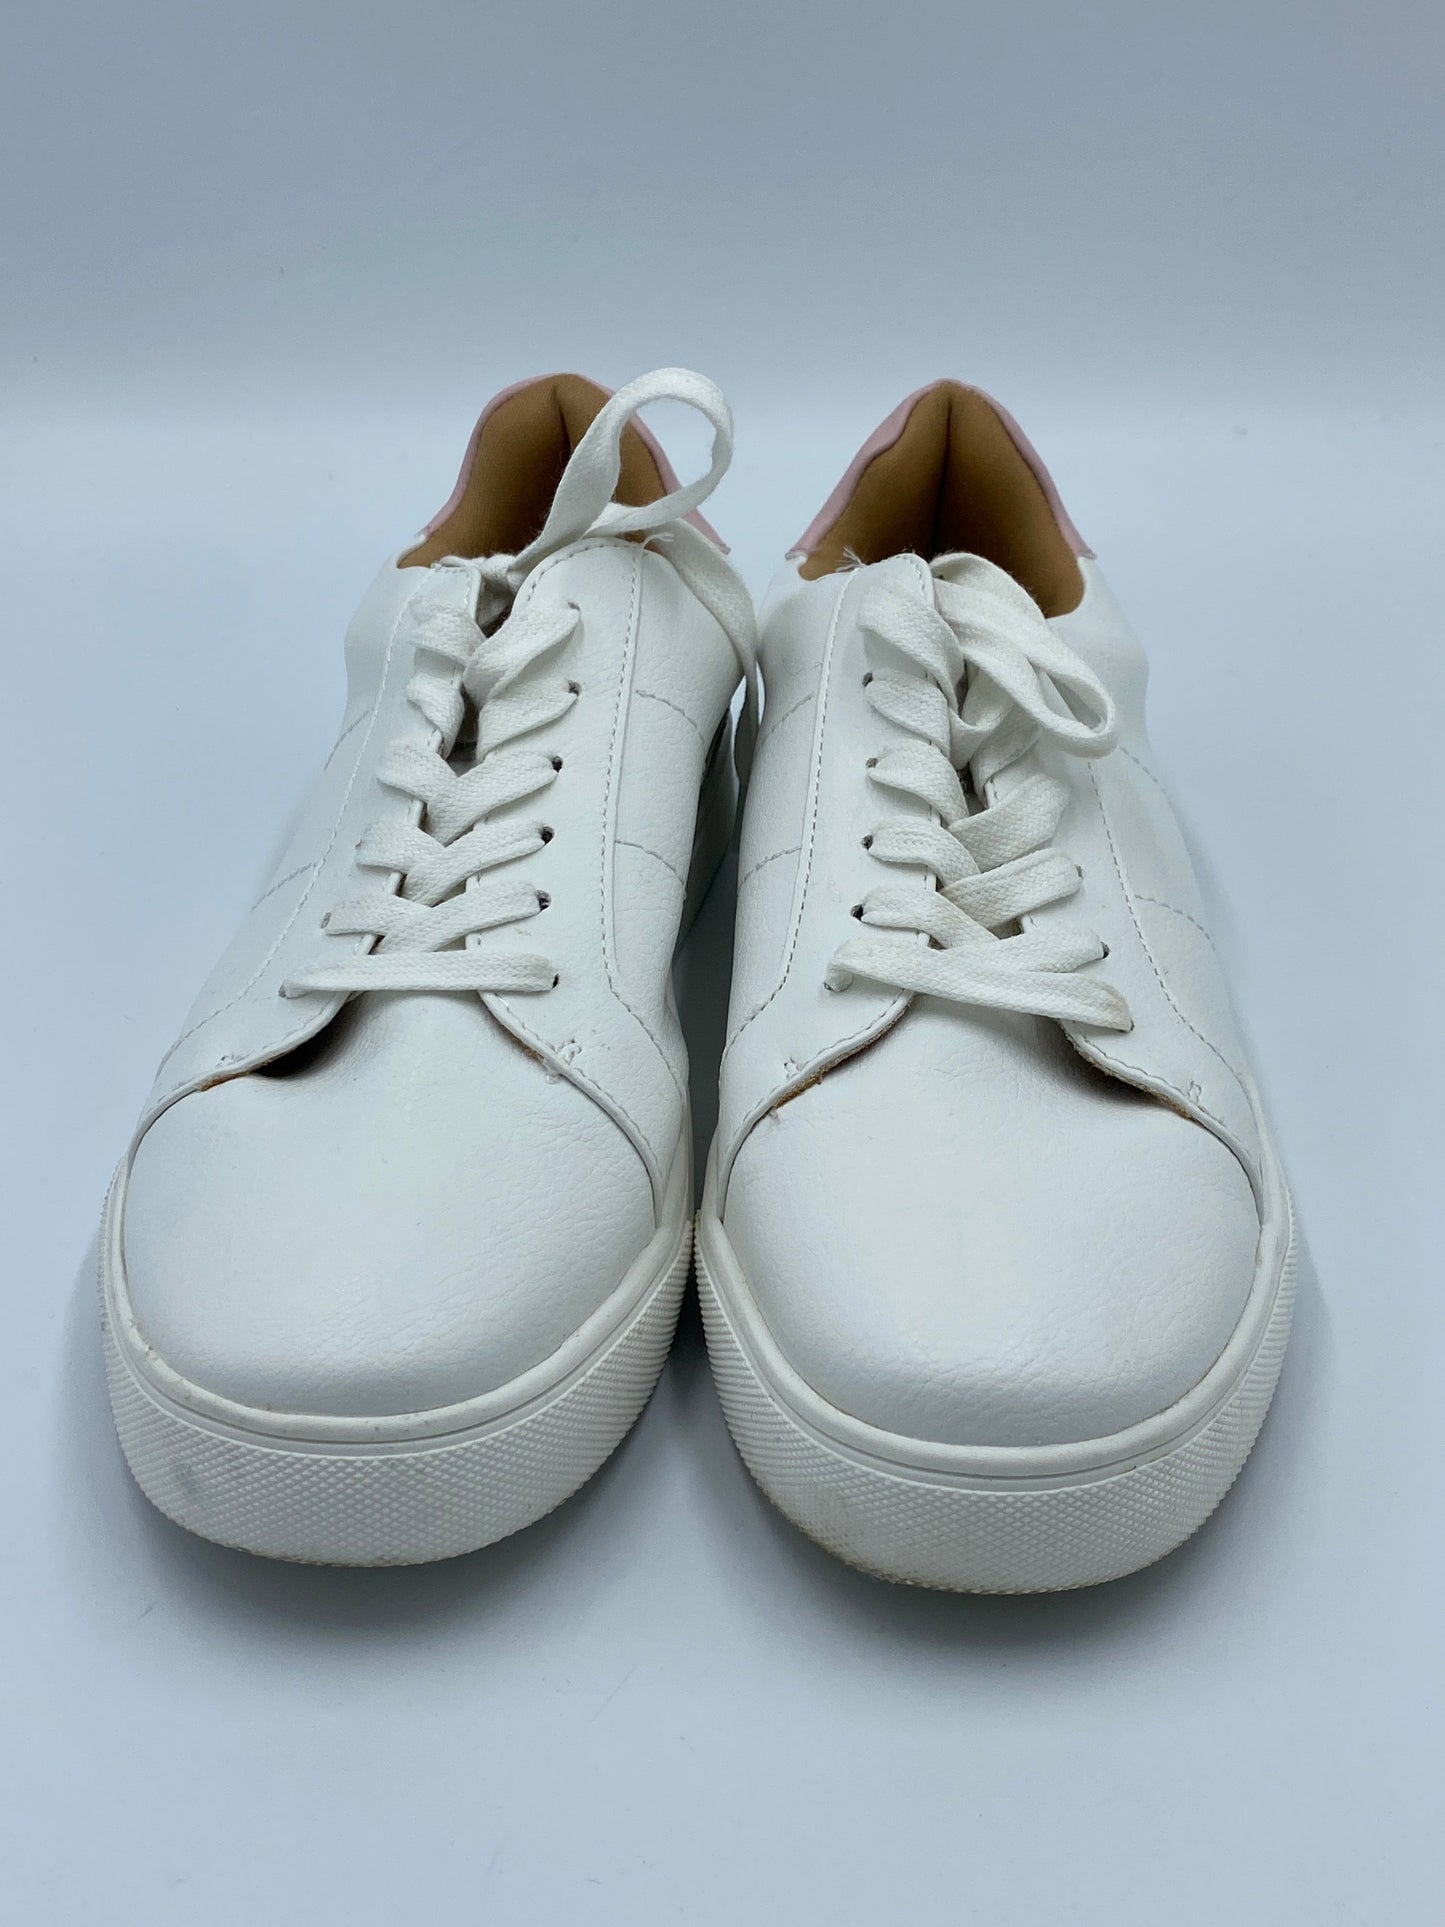 White Shoes Athletic Dolce Vita, Size 9